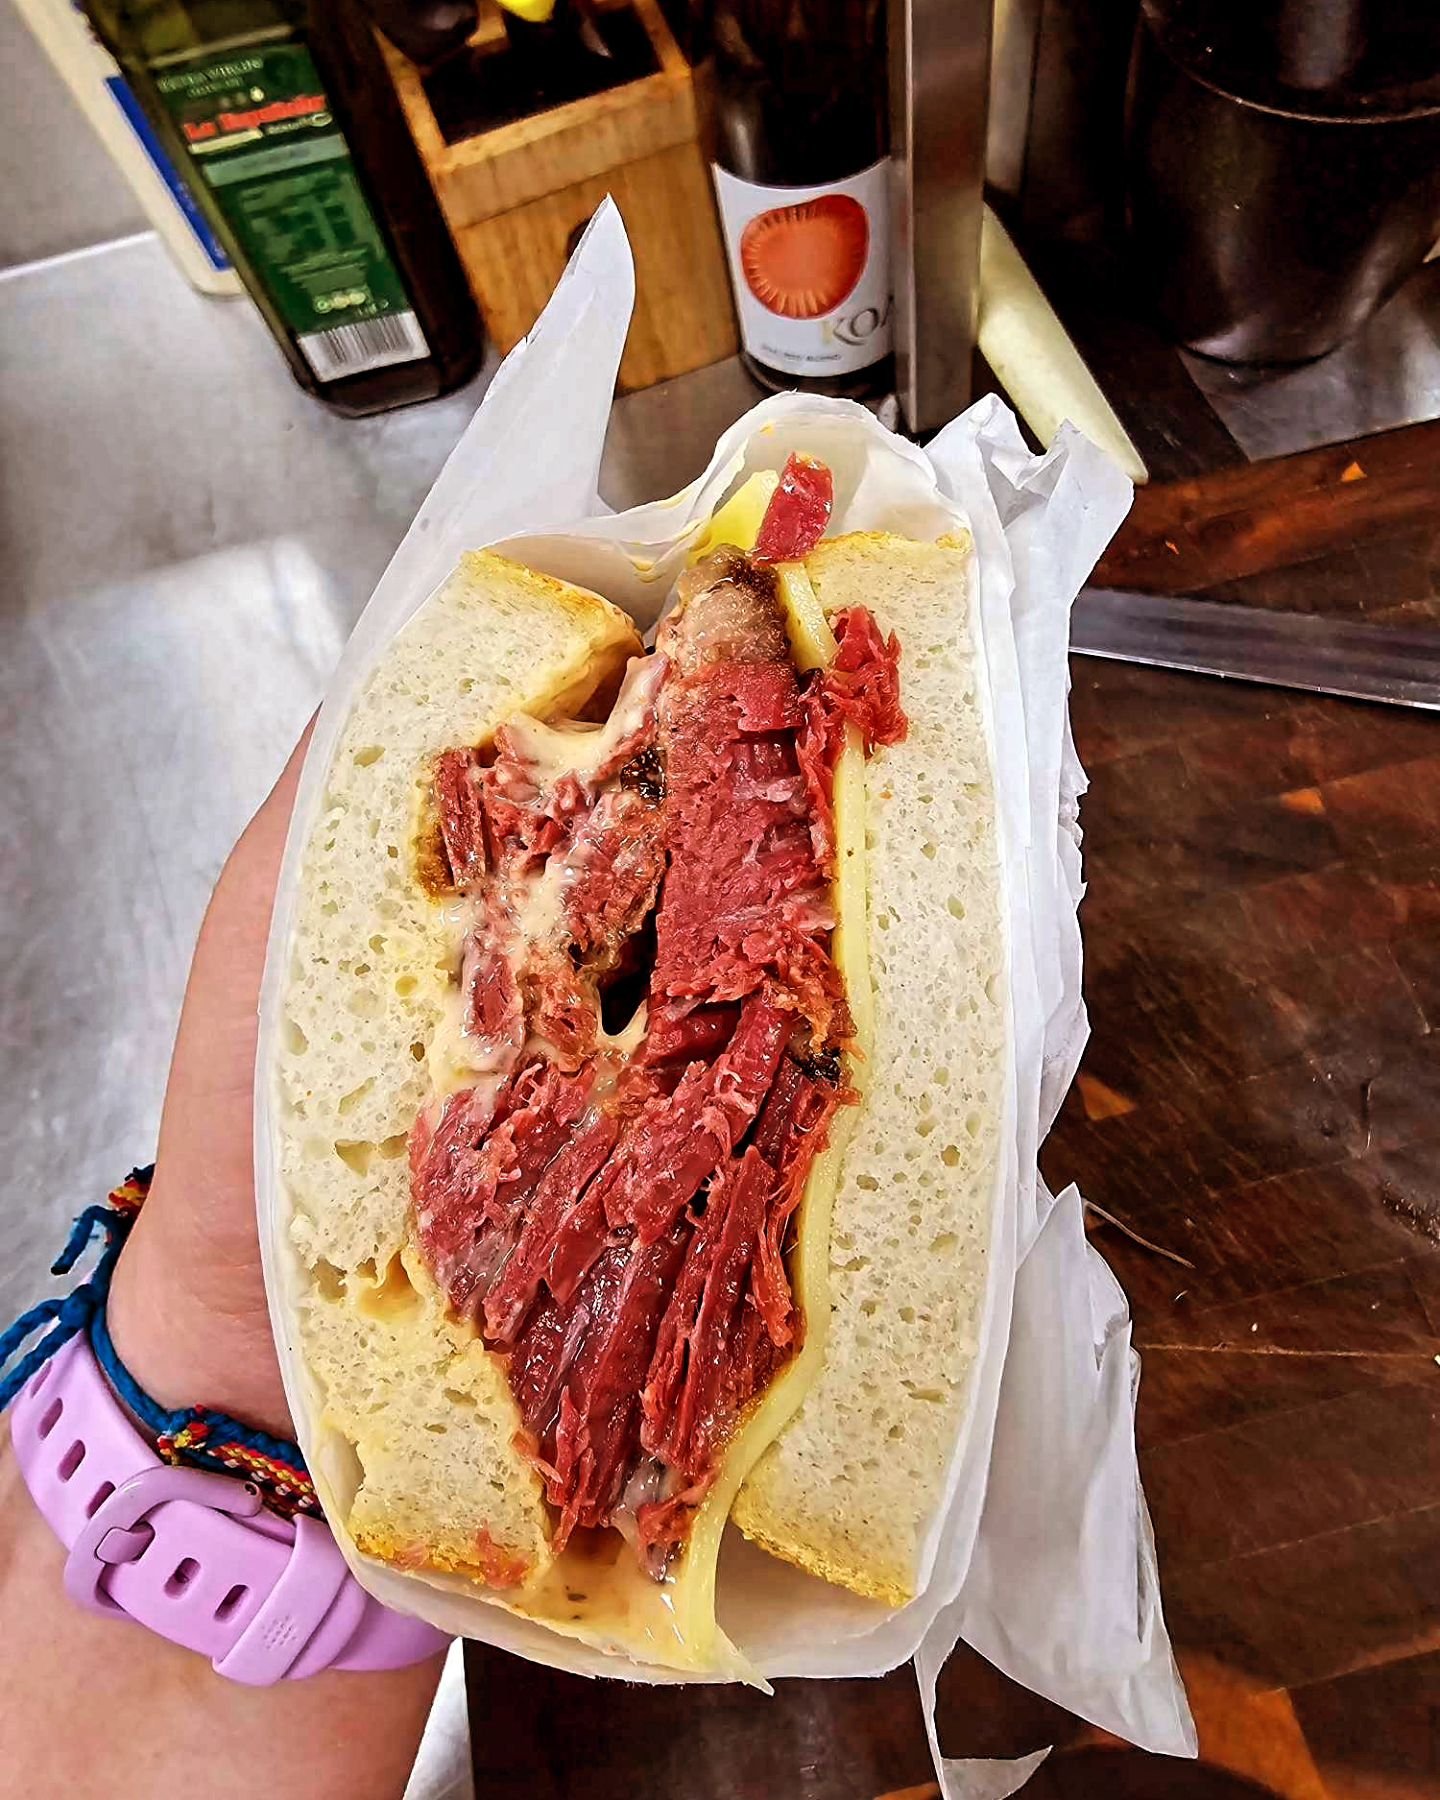 New lunch item 

Nyc deli style 
Pastrami sandwich 
Home smoked brisket on sourdough bread with russian dressing and swiss cheese only $12 
#haveyoubeenfedbyjed